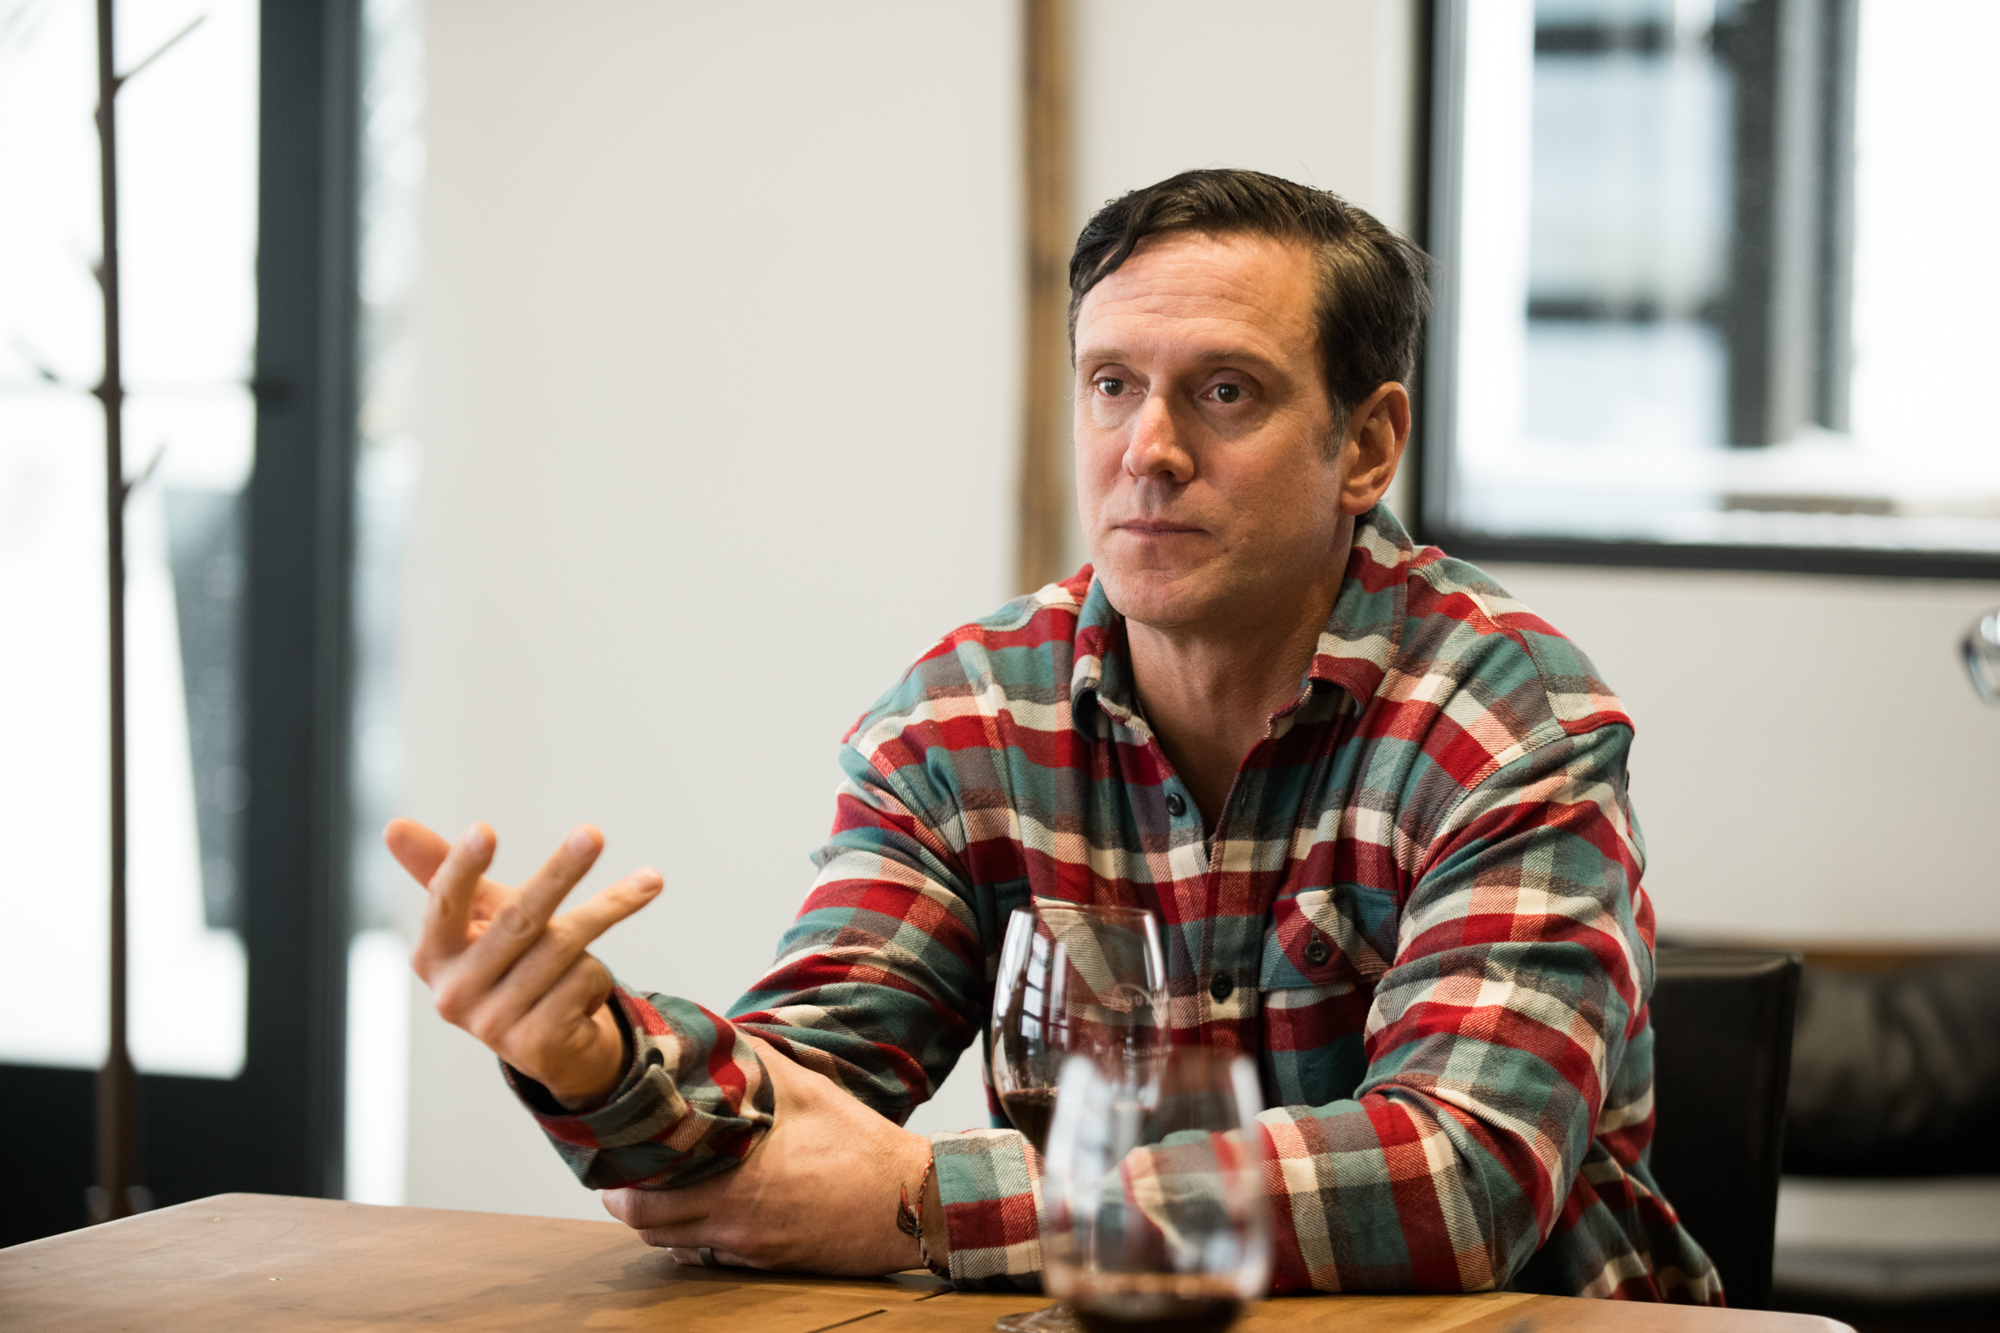 Chona Kasinger captures Drew Bledsoe as he describes his winery venture for this ESPN story 